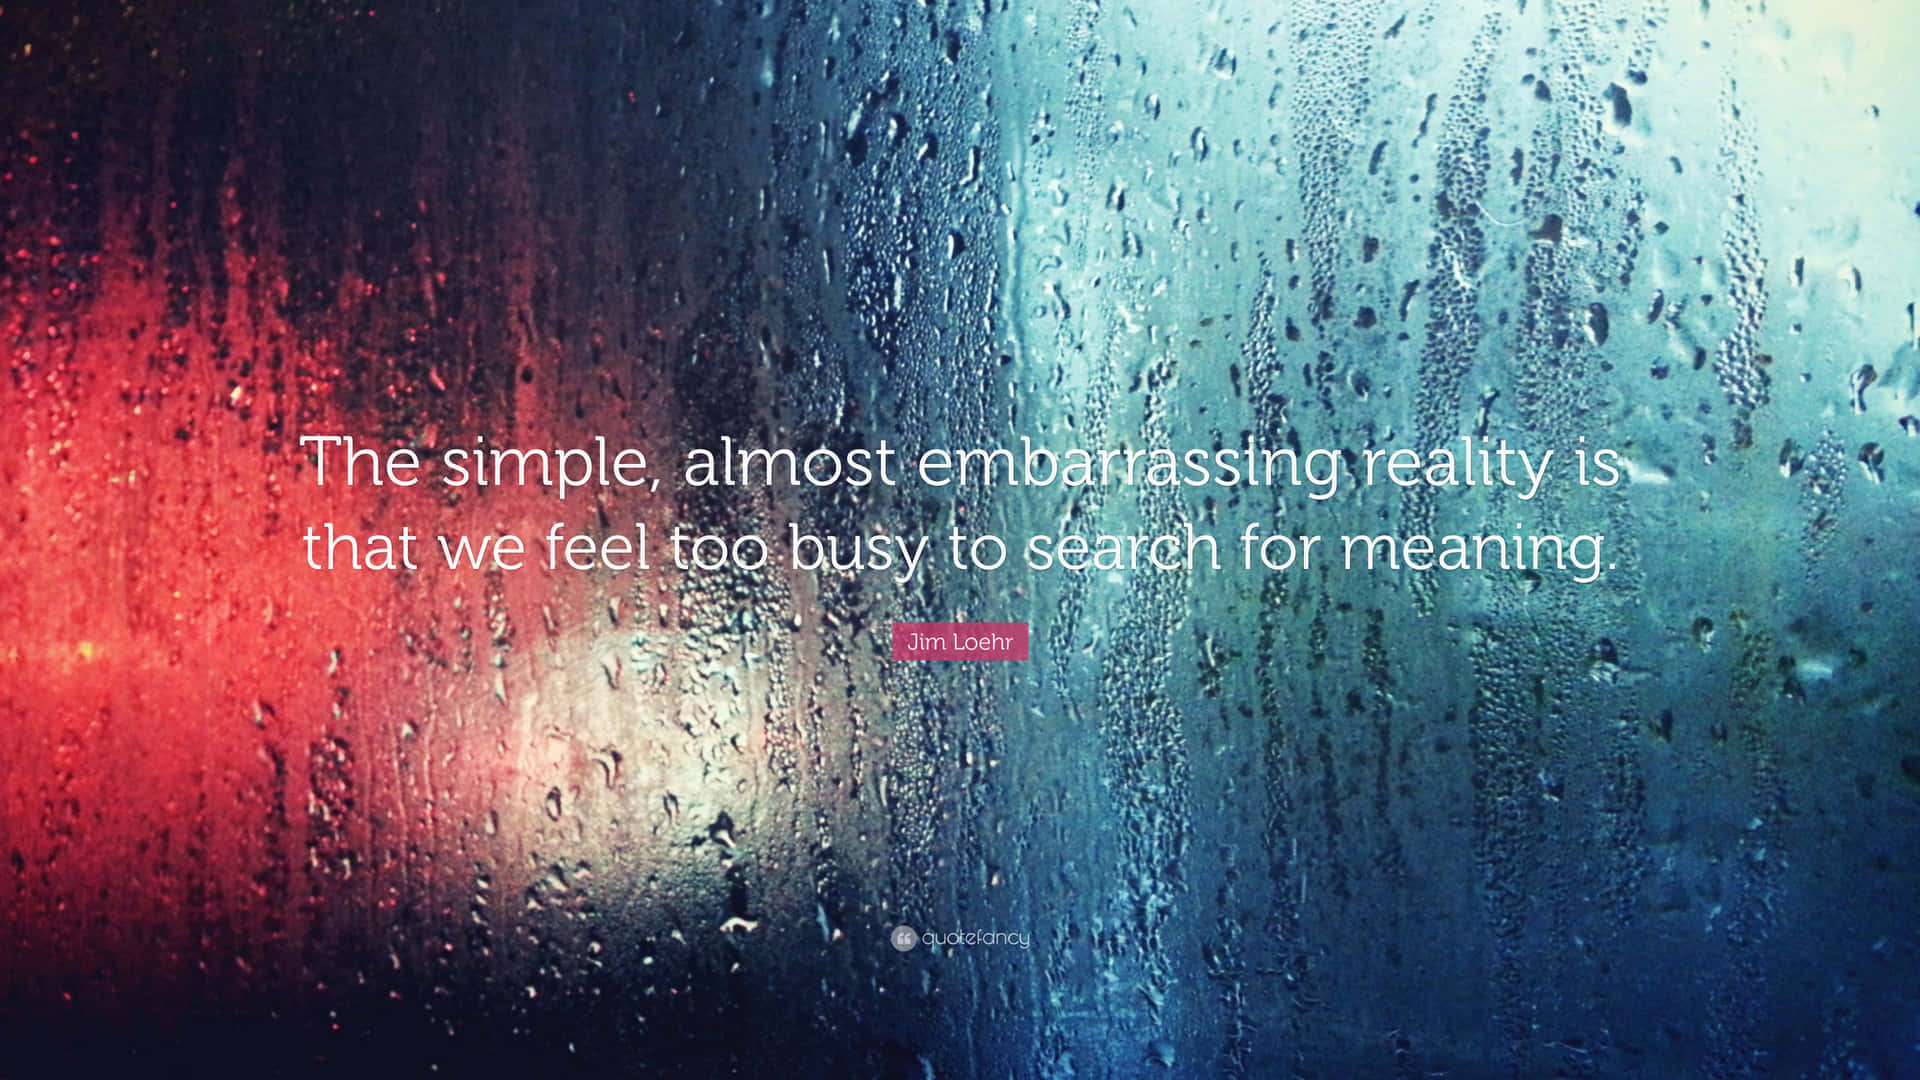 Embarrassing Reality Quote Rainy Window Wallpaper